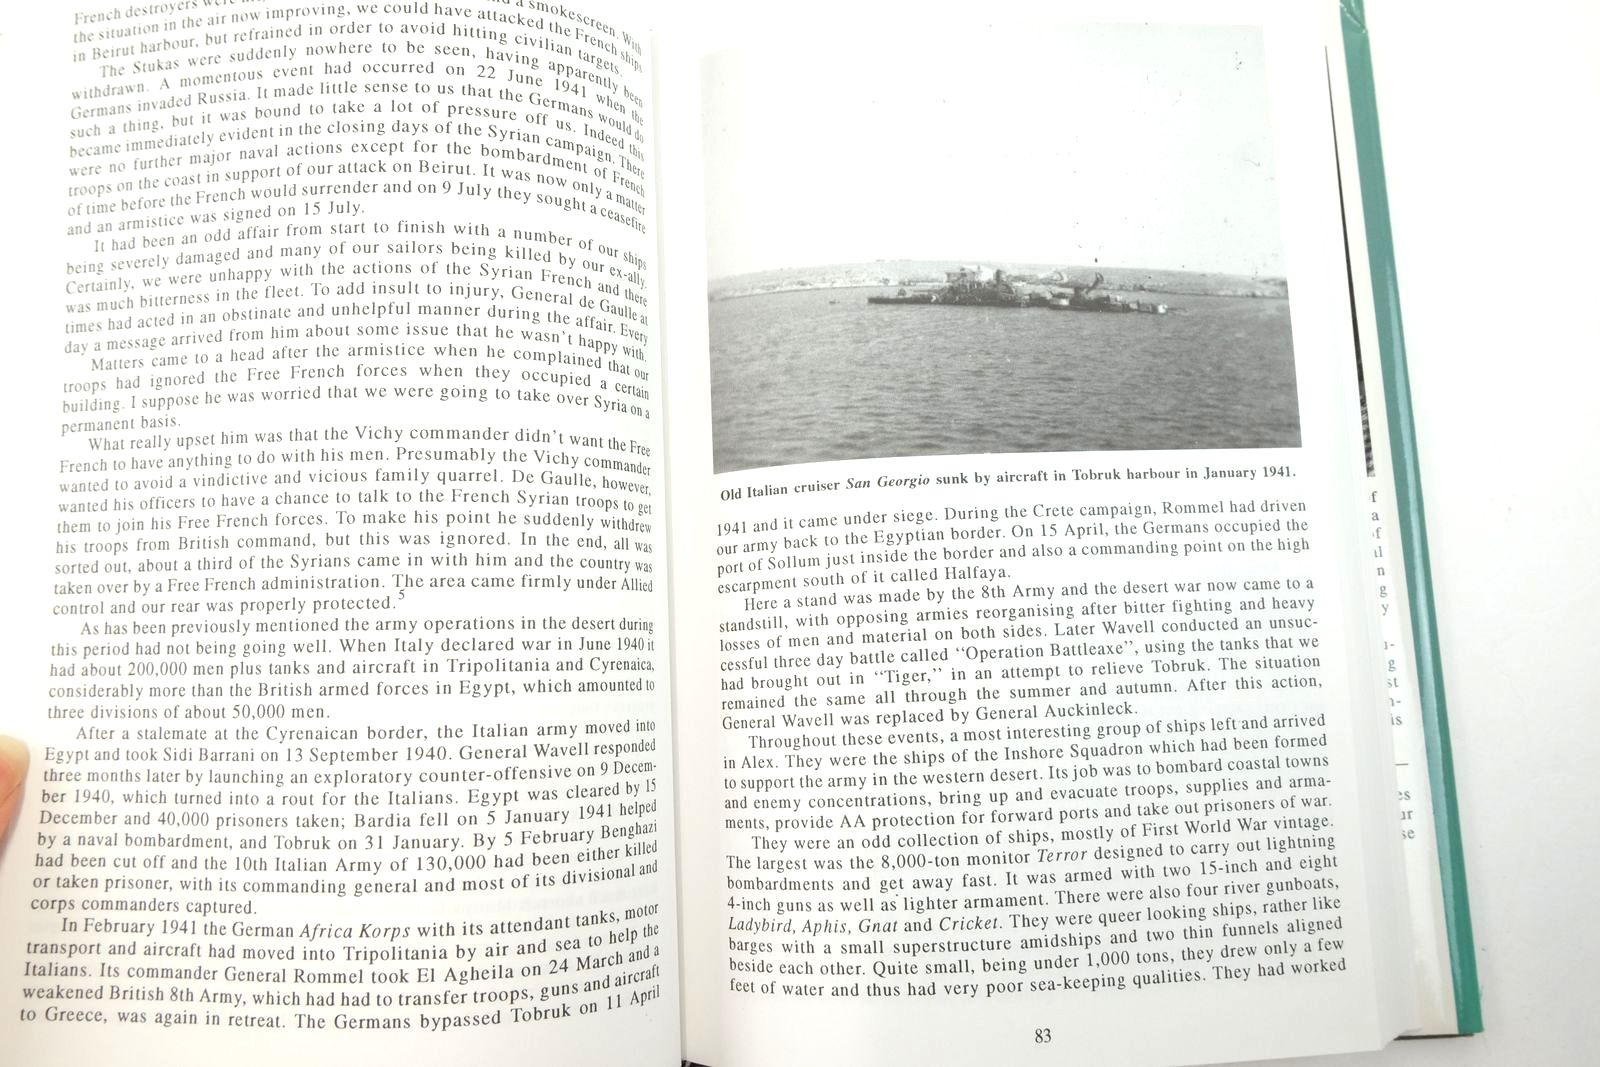 Photo of A MIDSHIPMAN'S WAR: A YOUNG MAN IN THE MEDITERRANEAN NAVAL WAR 1941-1943 written by Wade, Frank published by Cordillera Publishing Company (STOCK CODE: 2138003)  for sale by Stella & Rose's Books